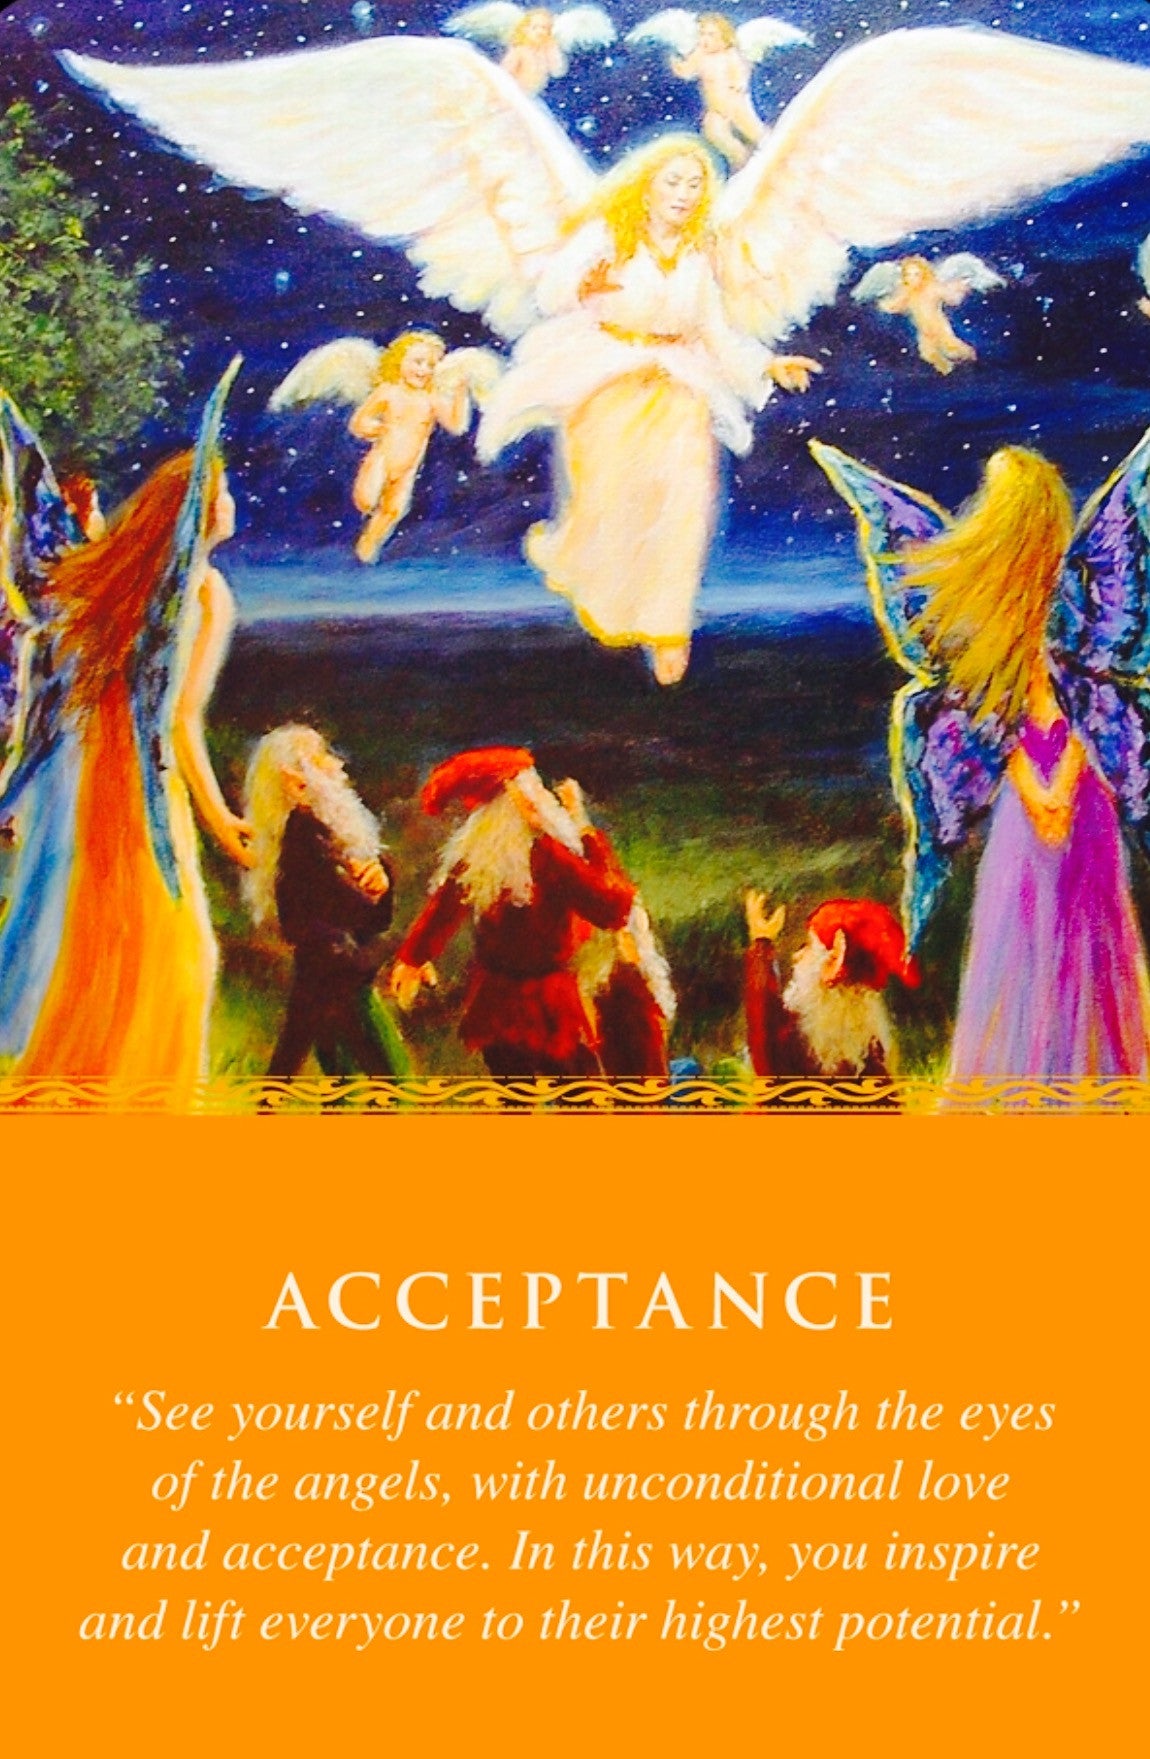 See yourself and others through the eyes of the angels, with unconditional love and acceptance.